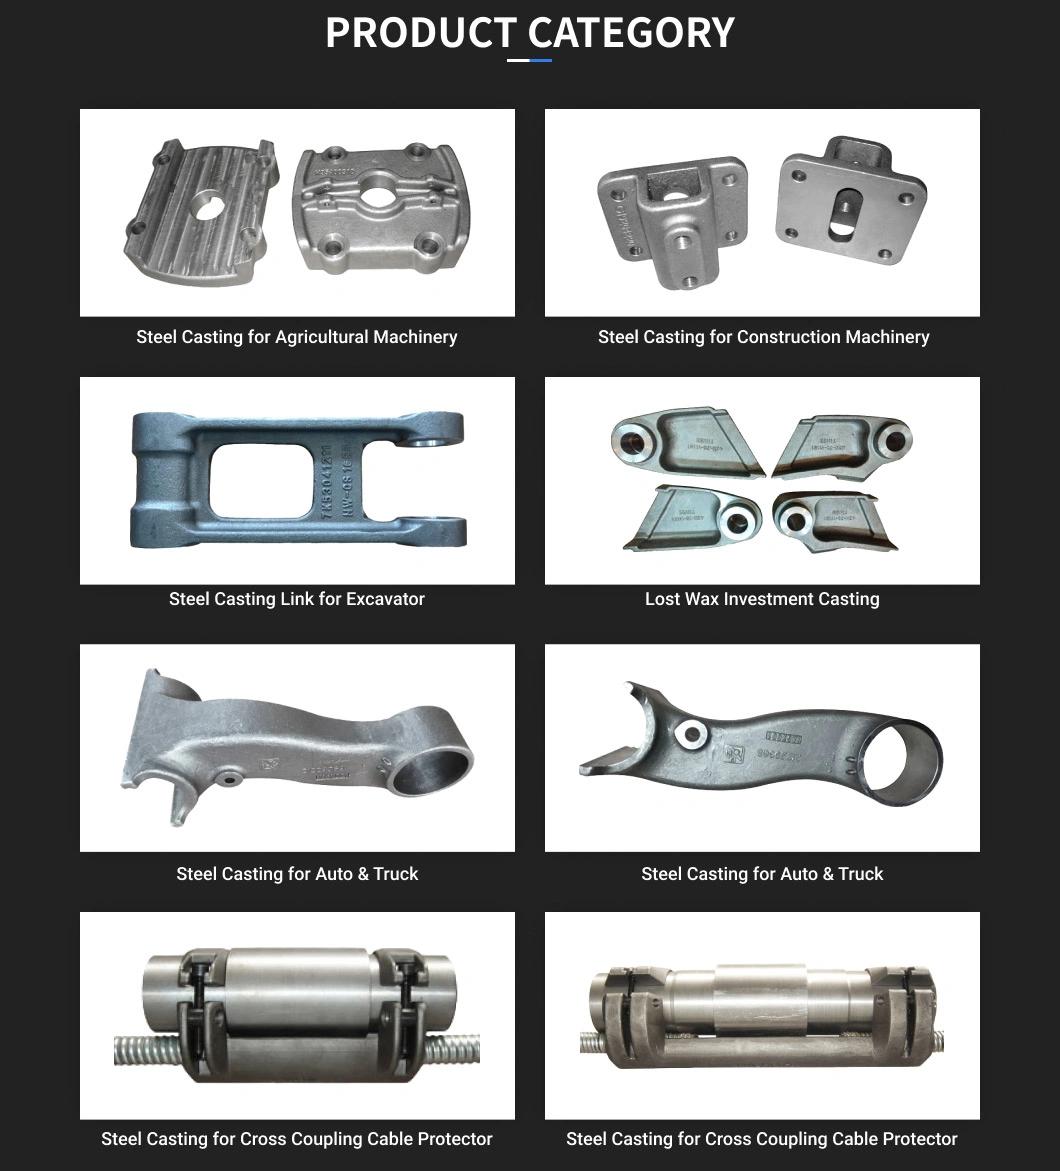 Low Price Safety Quick Proofing Services Casting Production Parts